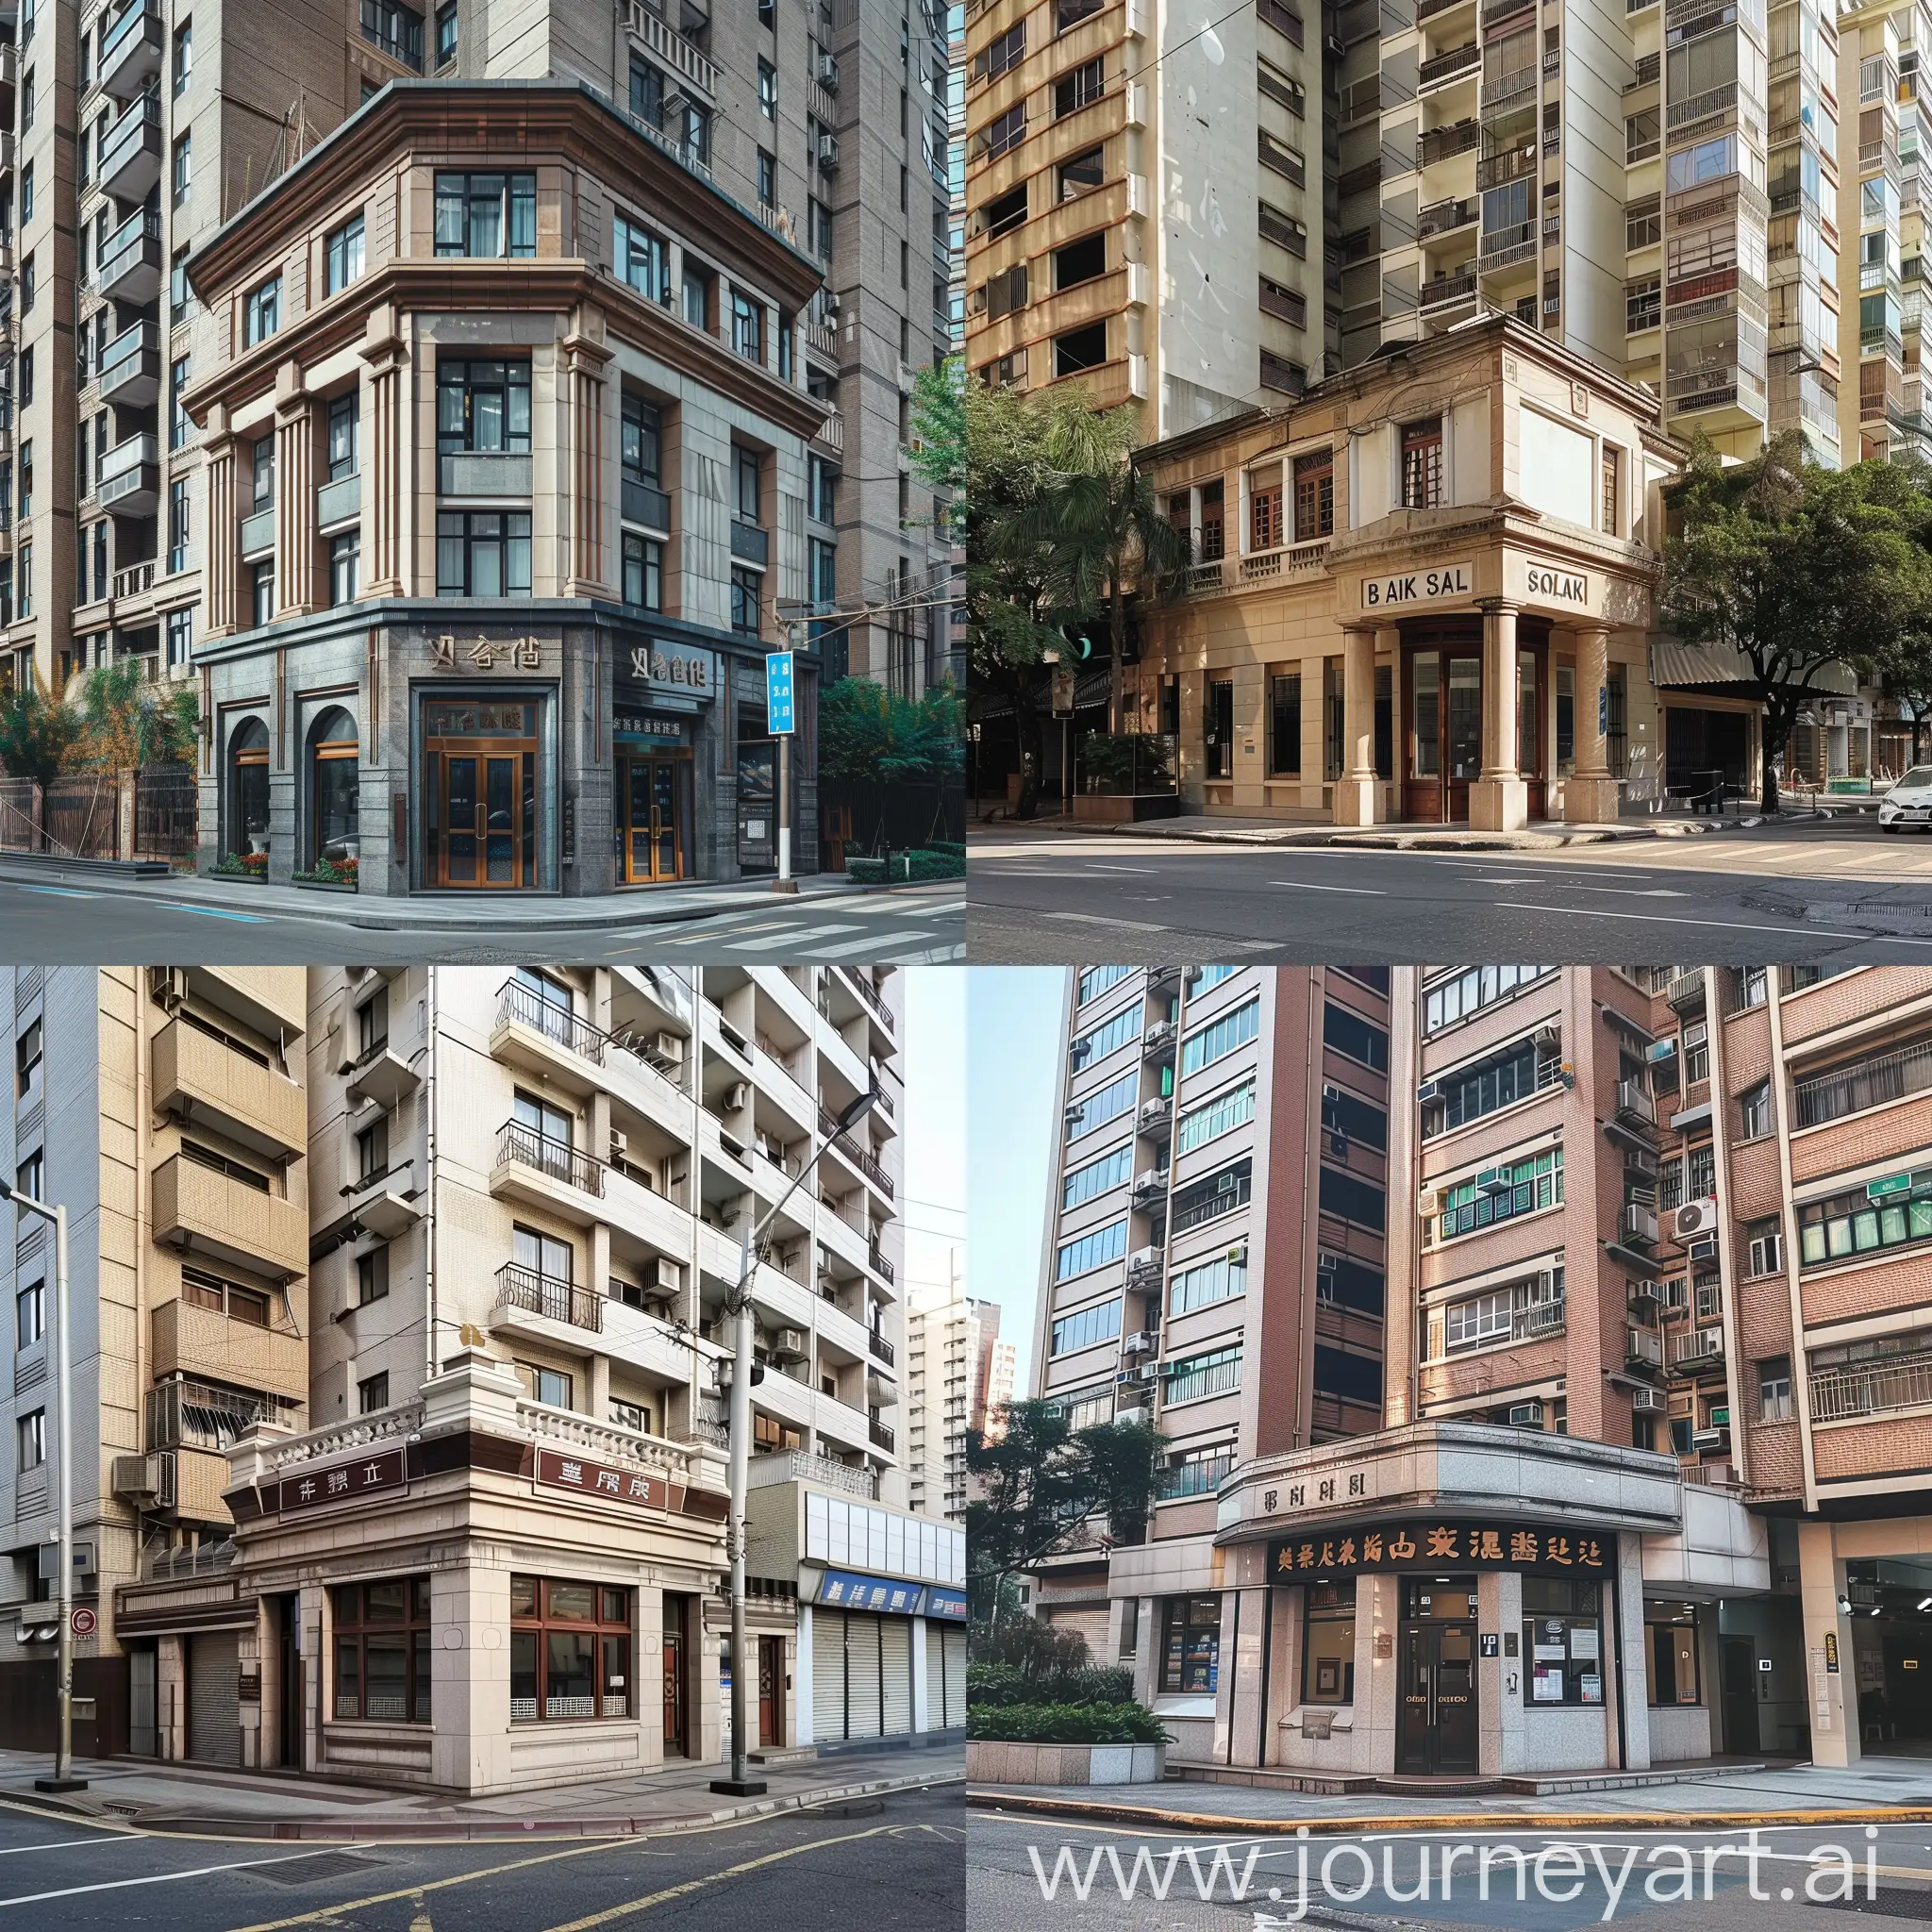 Traditional-Bank-Building-Amid-Urban-HighRise